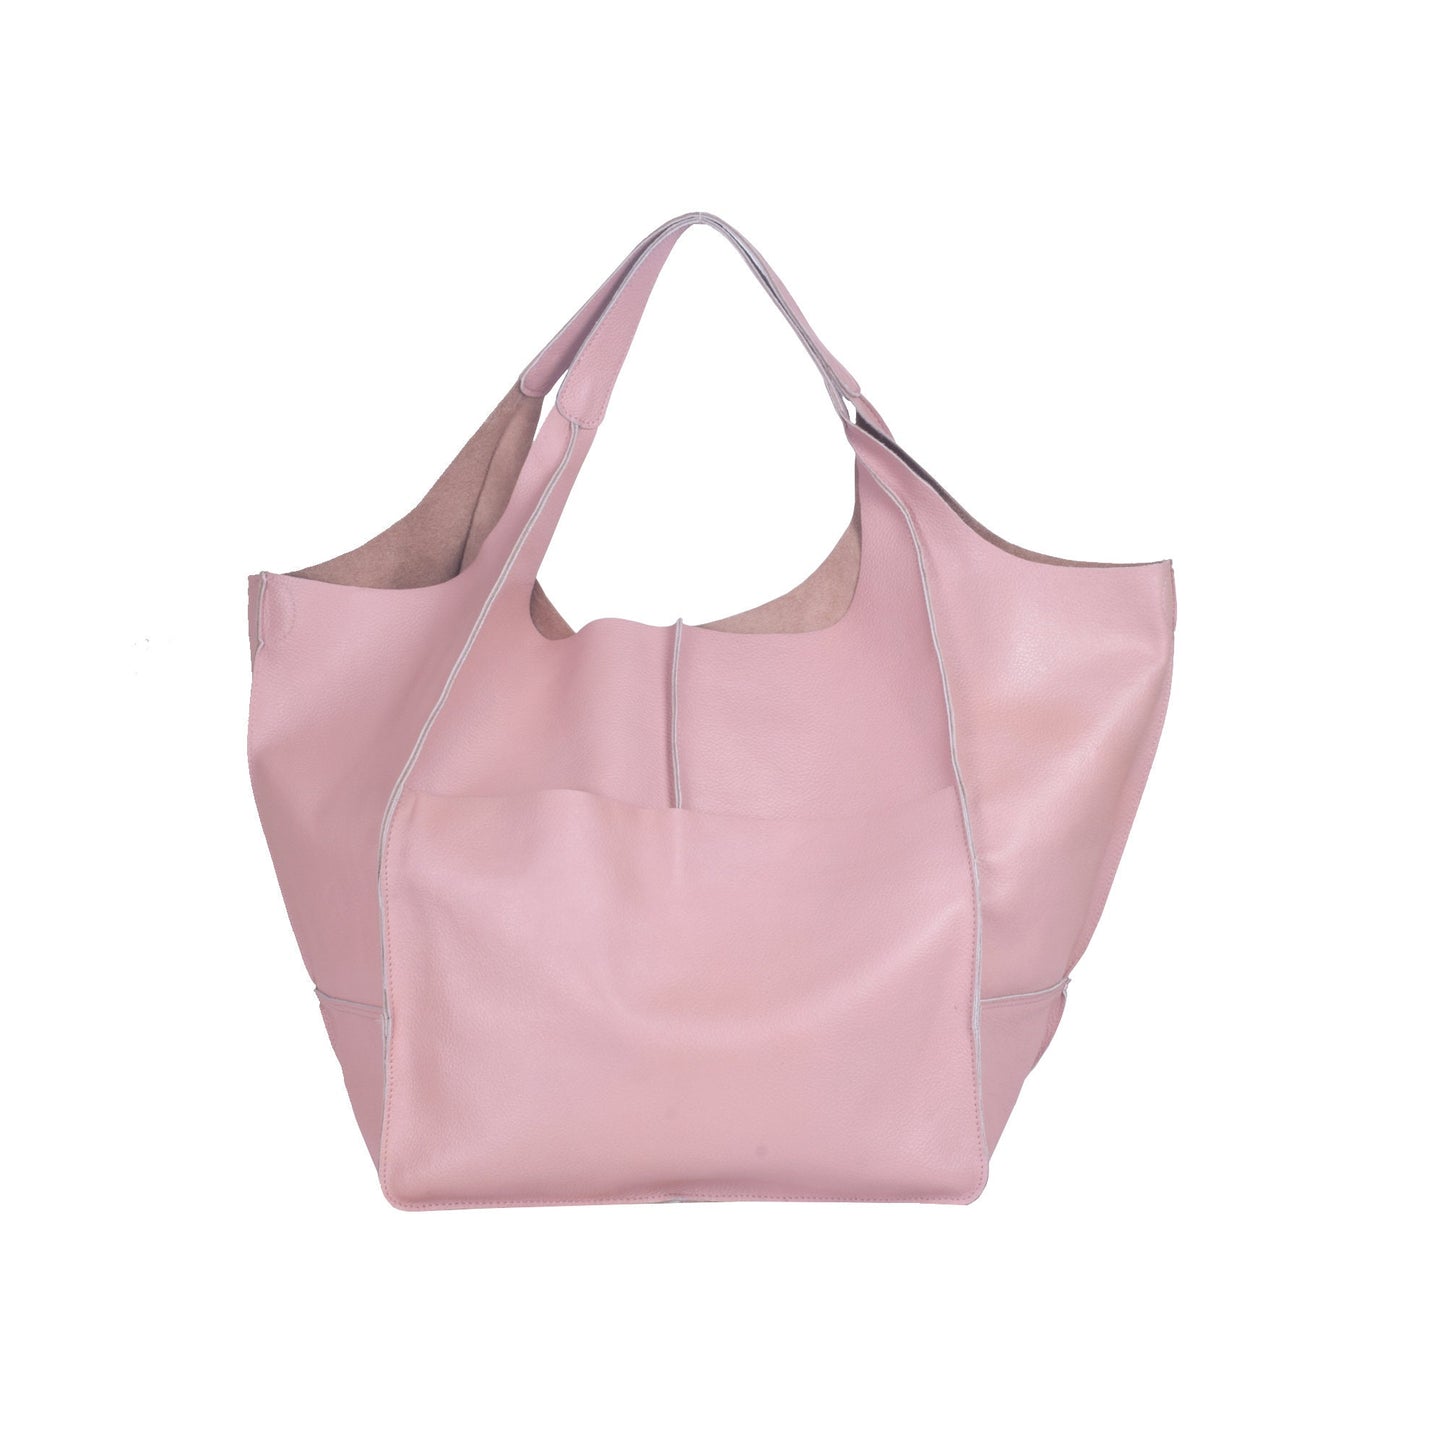 Baby Pink Oversize Leather Tote Shopper Bag XXXL Size Leather Bag Shoulder Bag Large Travel Bag Leather Shopping Bag Oversized Everyday Tote